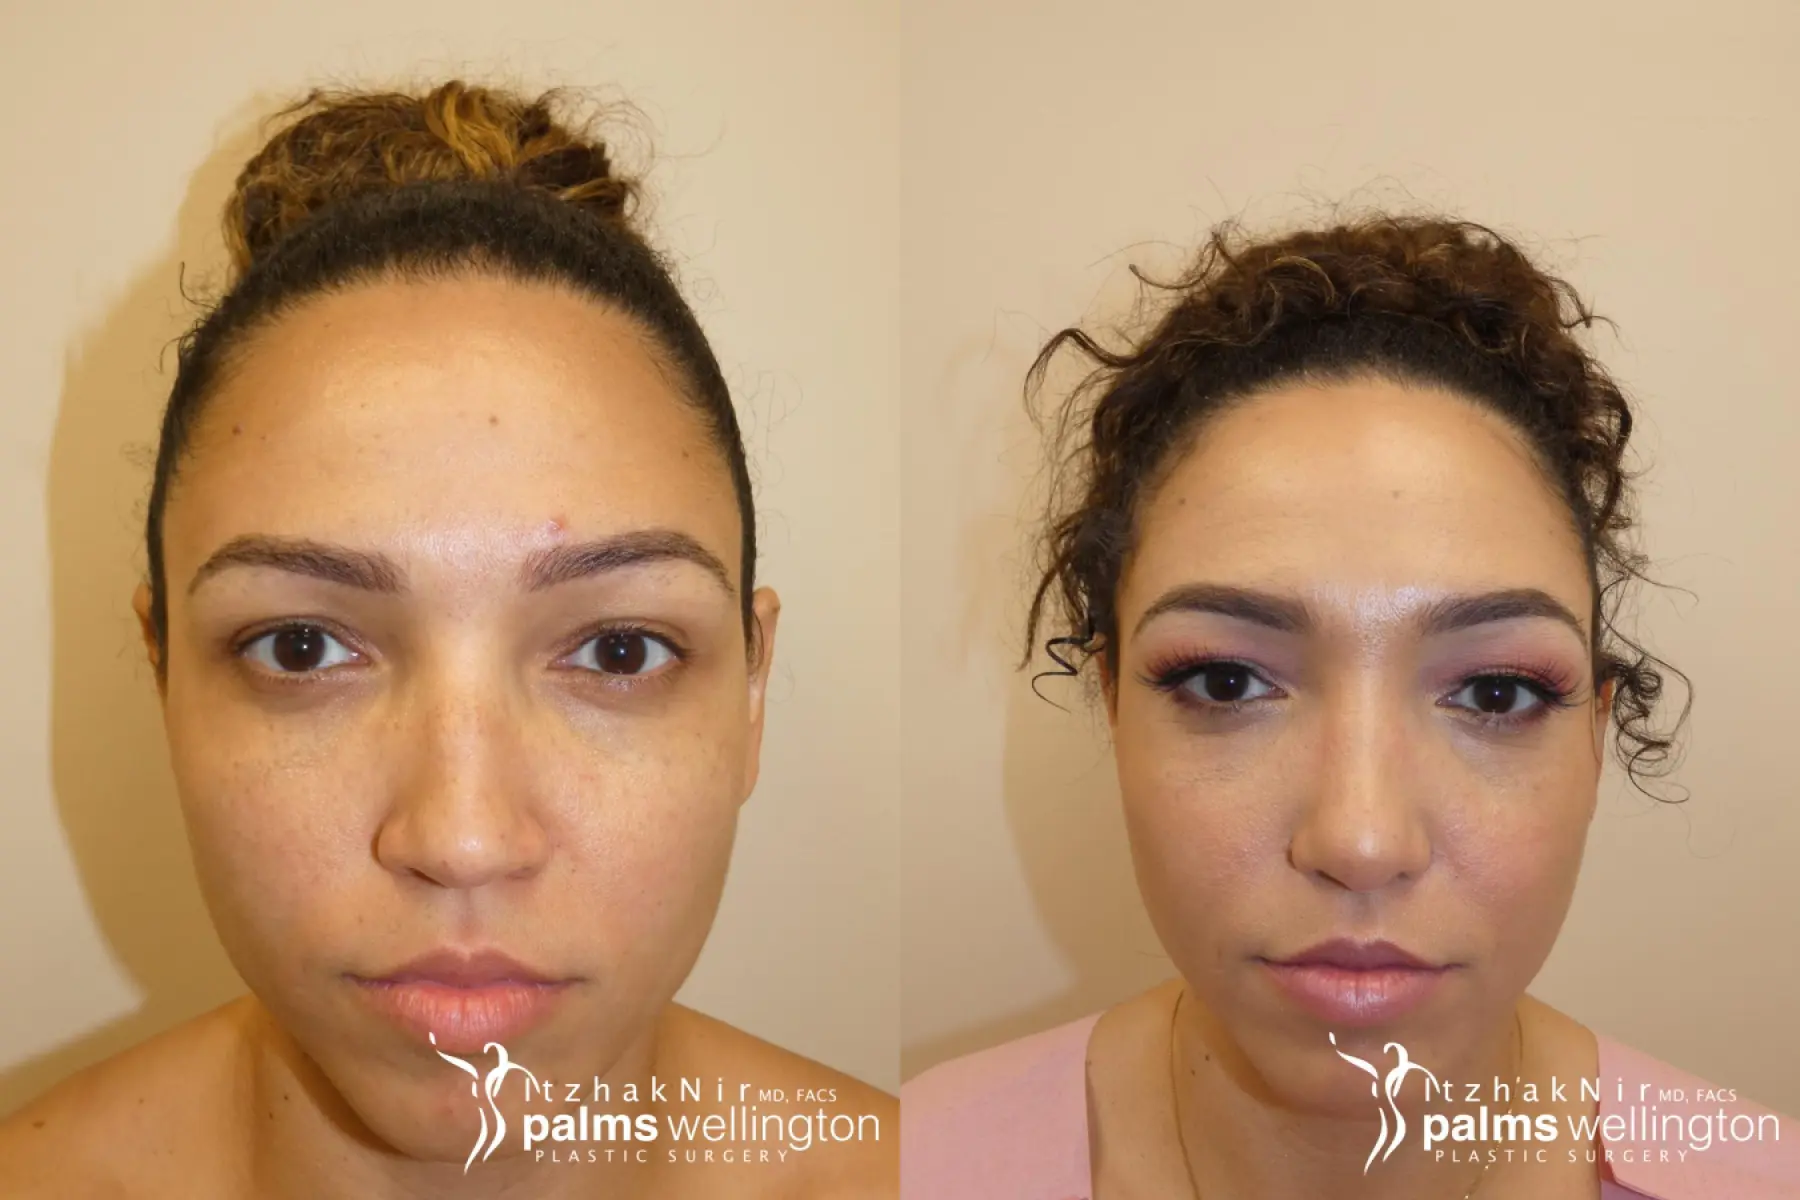 Rhinoplasty | Palm Beach - Before and After